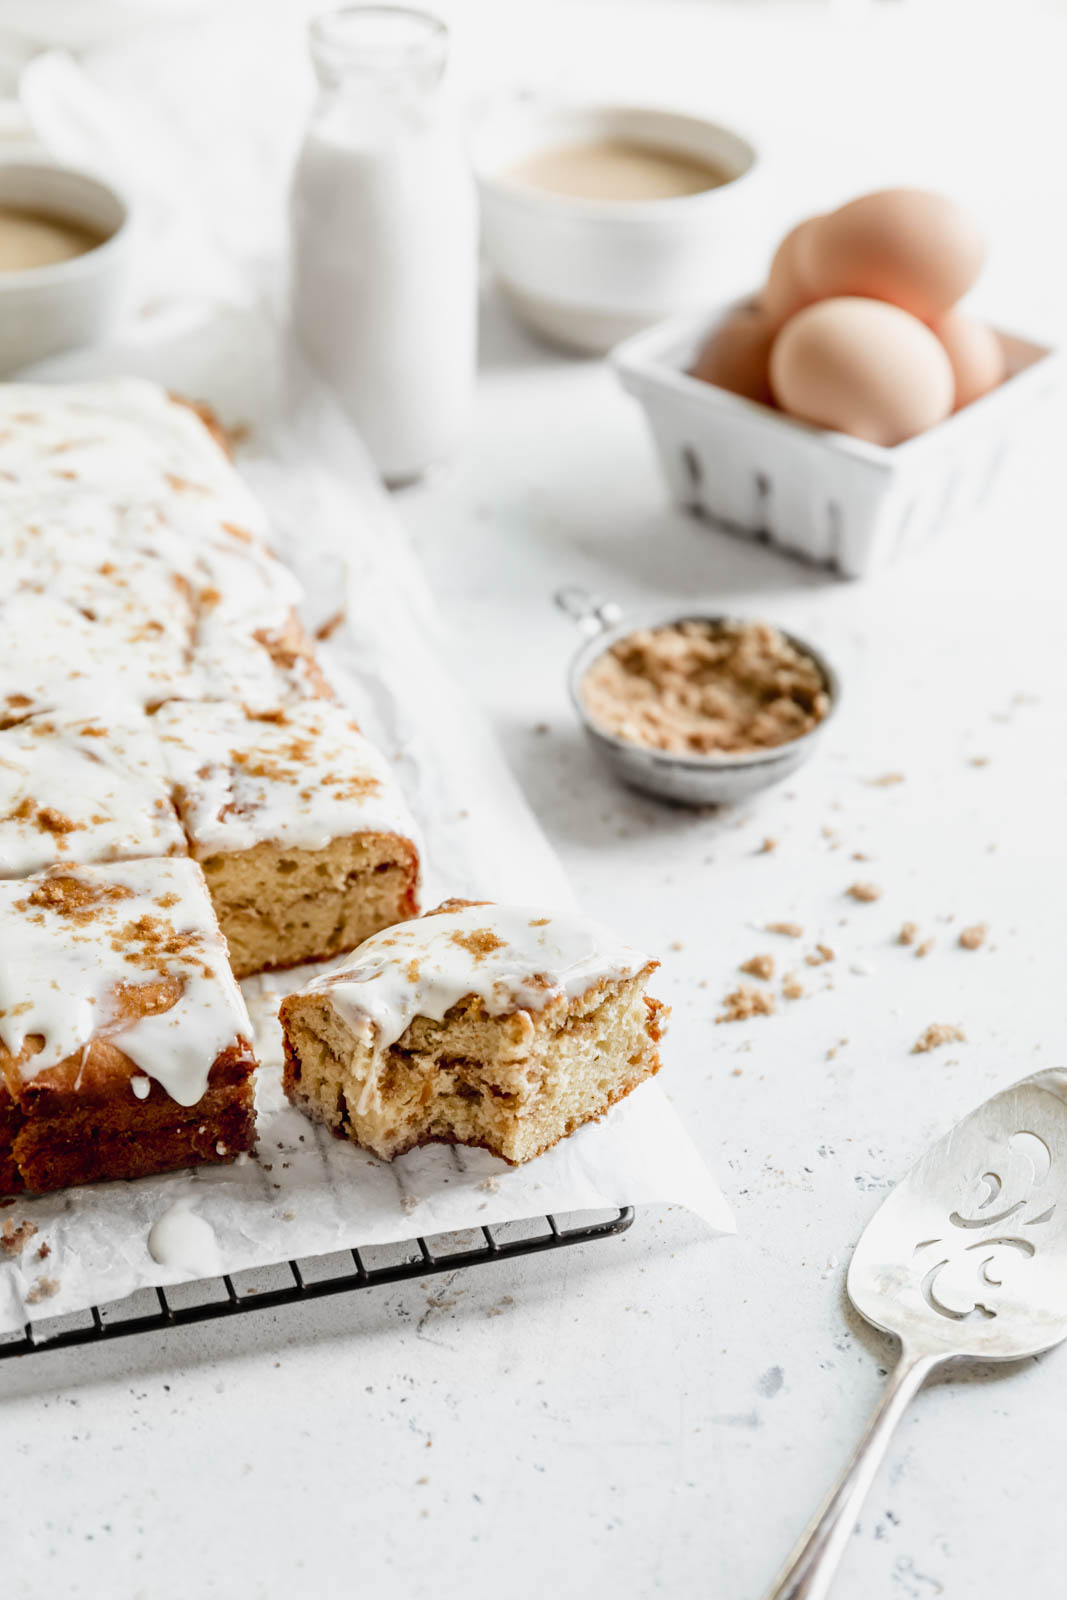 Buttery cinnamon roll cake swirled with ribbons of cinnamon and topped with a cream cheese glaze. All the decadence of a Cinnabon in half the time.